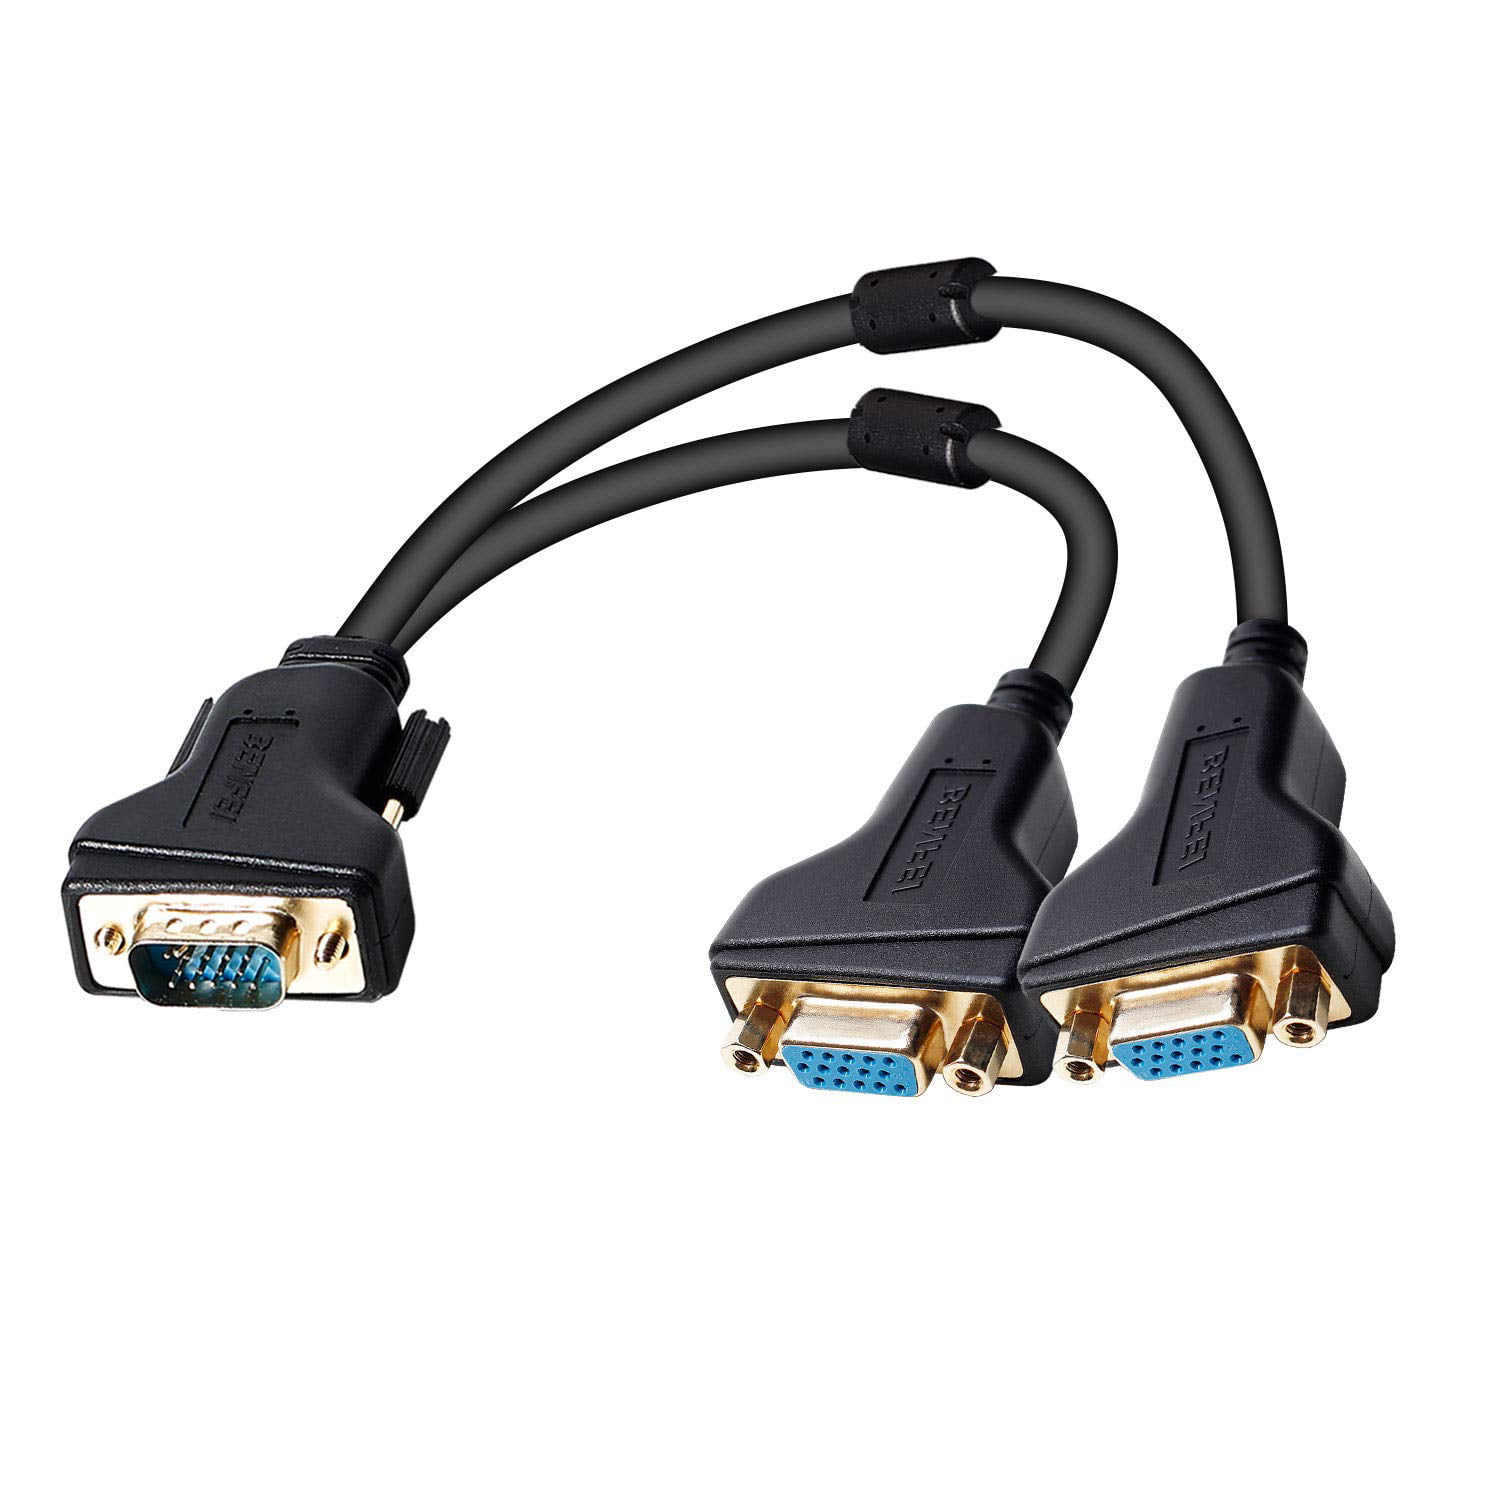 VGA Monitor Splitter Cable 1 Male to 2 Female Monitor Converter Y Splitter Video Cable 1ft for Screen Duplication Black 